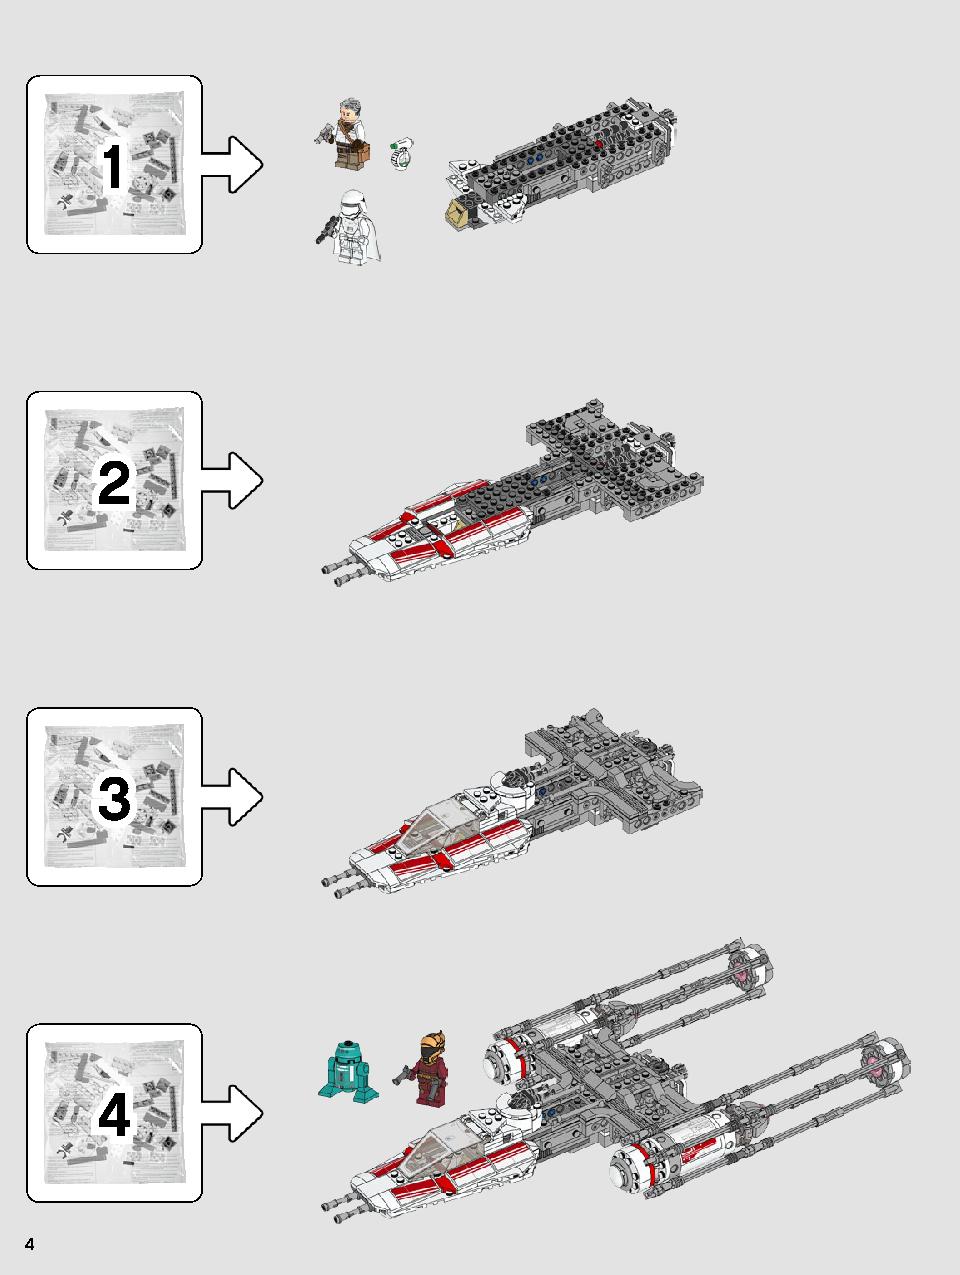 Resistance Y-Wing Starfighter 75249 LEGO information LEGO instructions 4 page